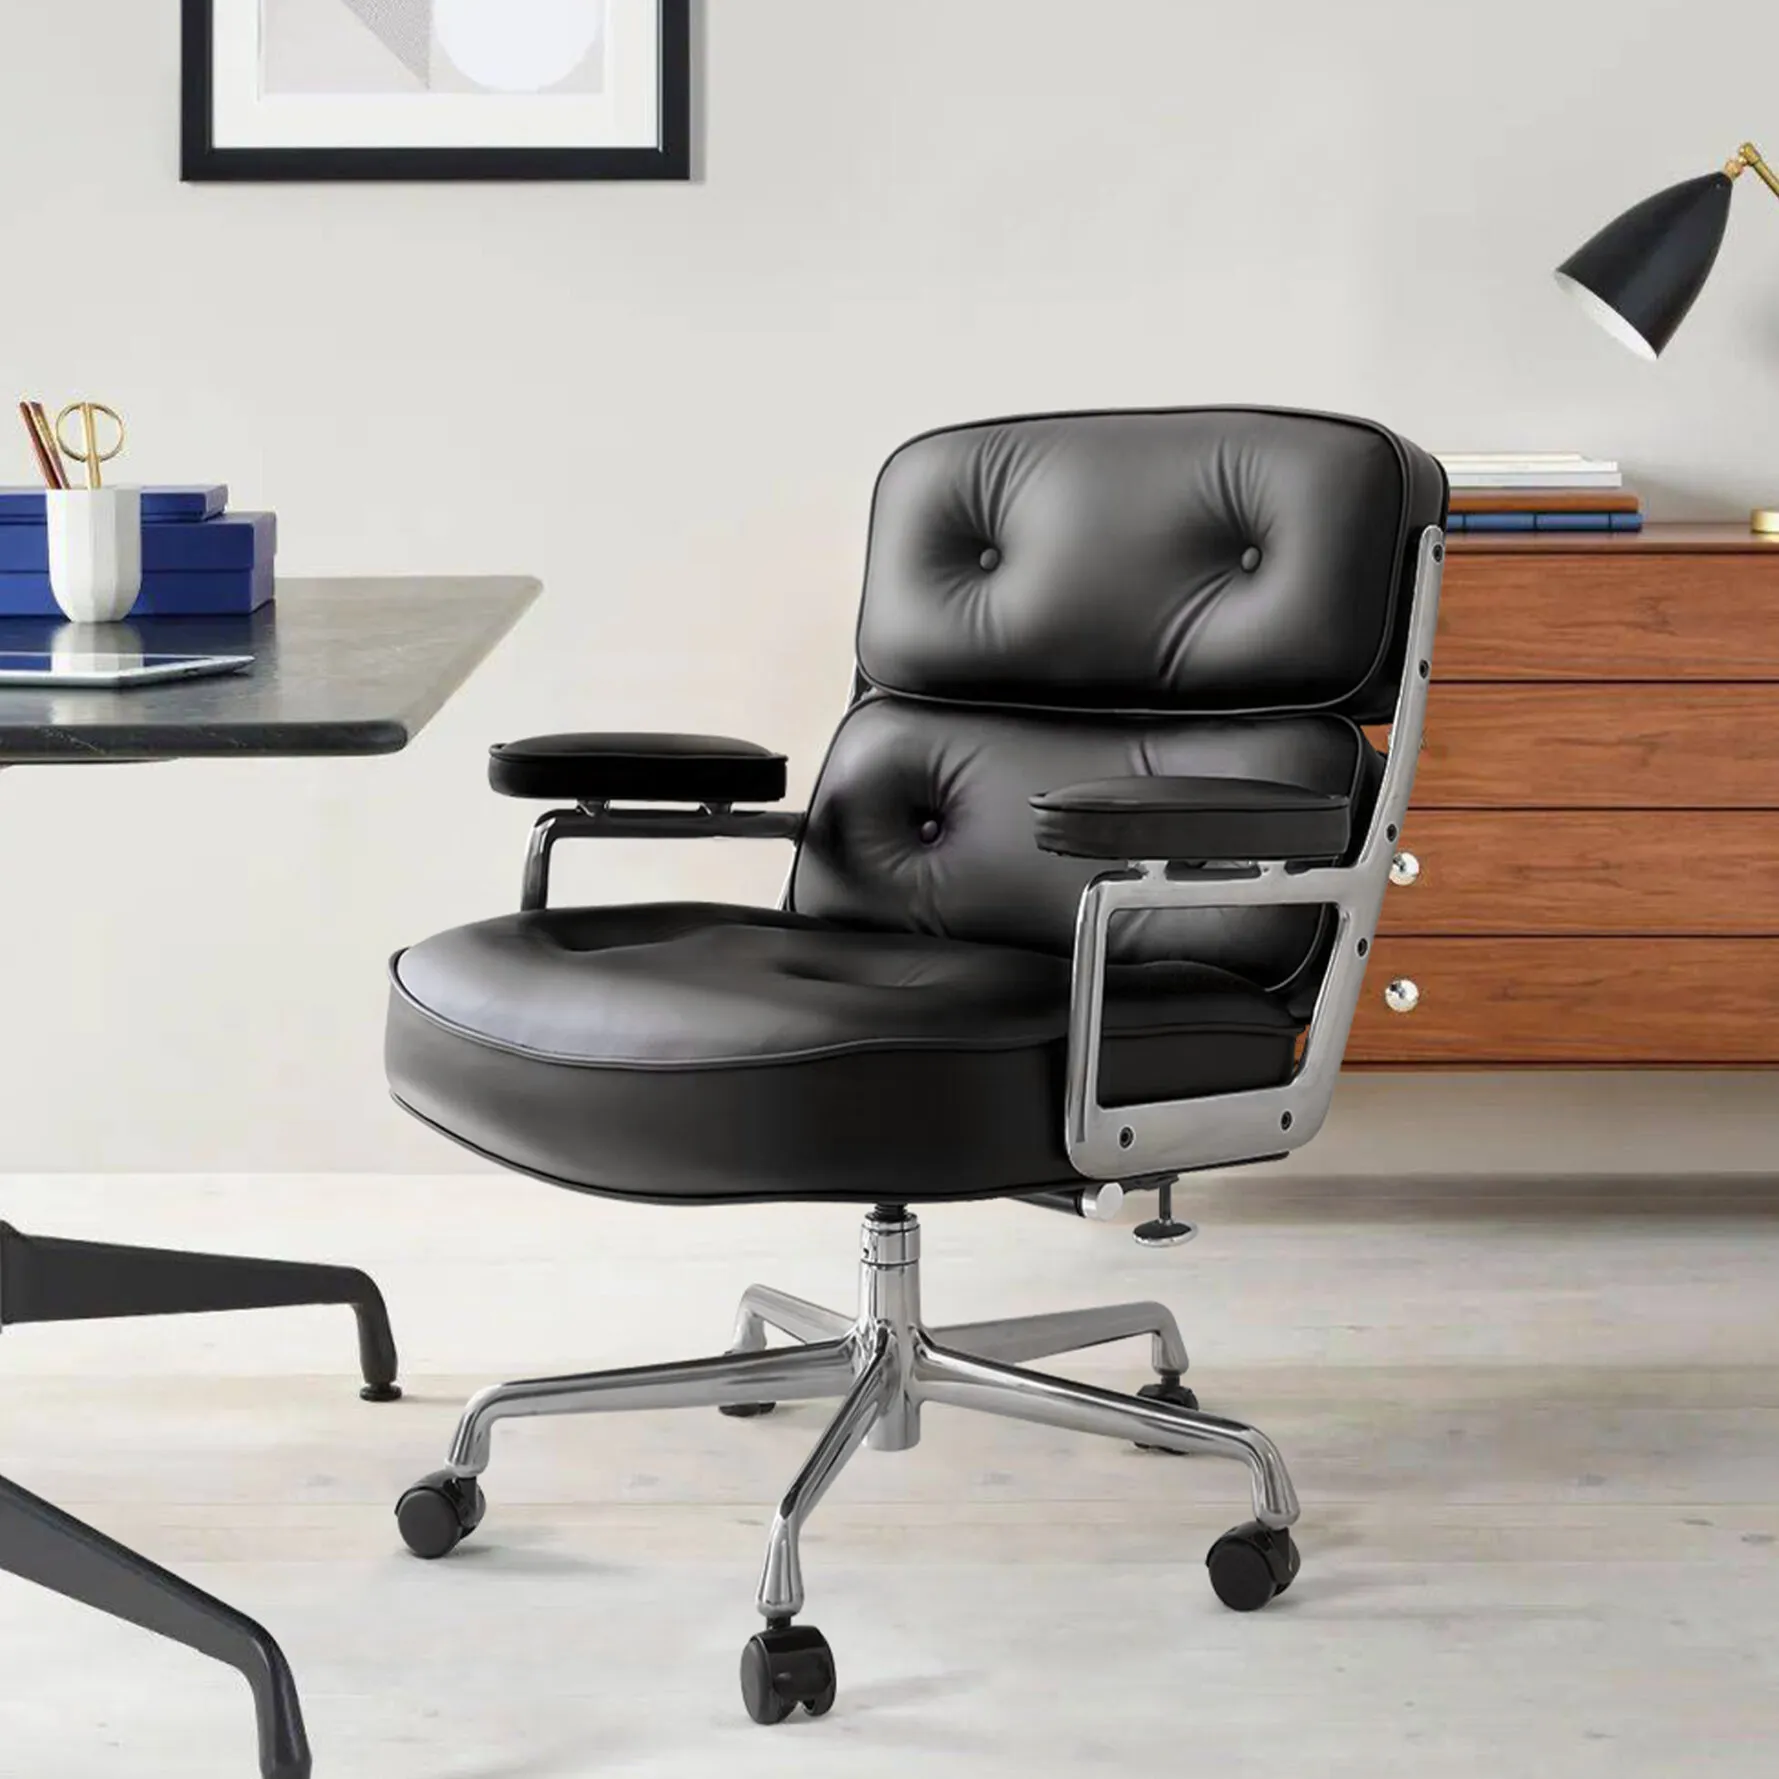 3 Best Office Chair for Heavy Person That Offer Plenty Of Support